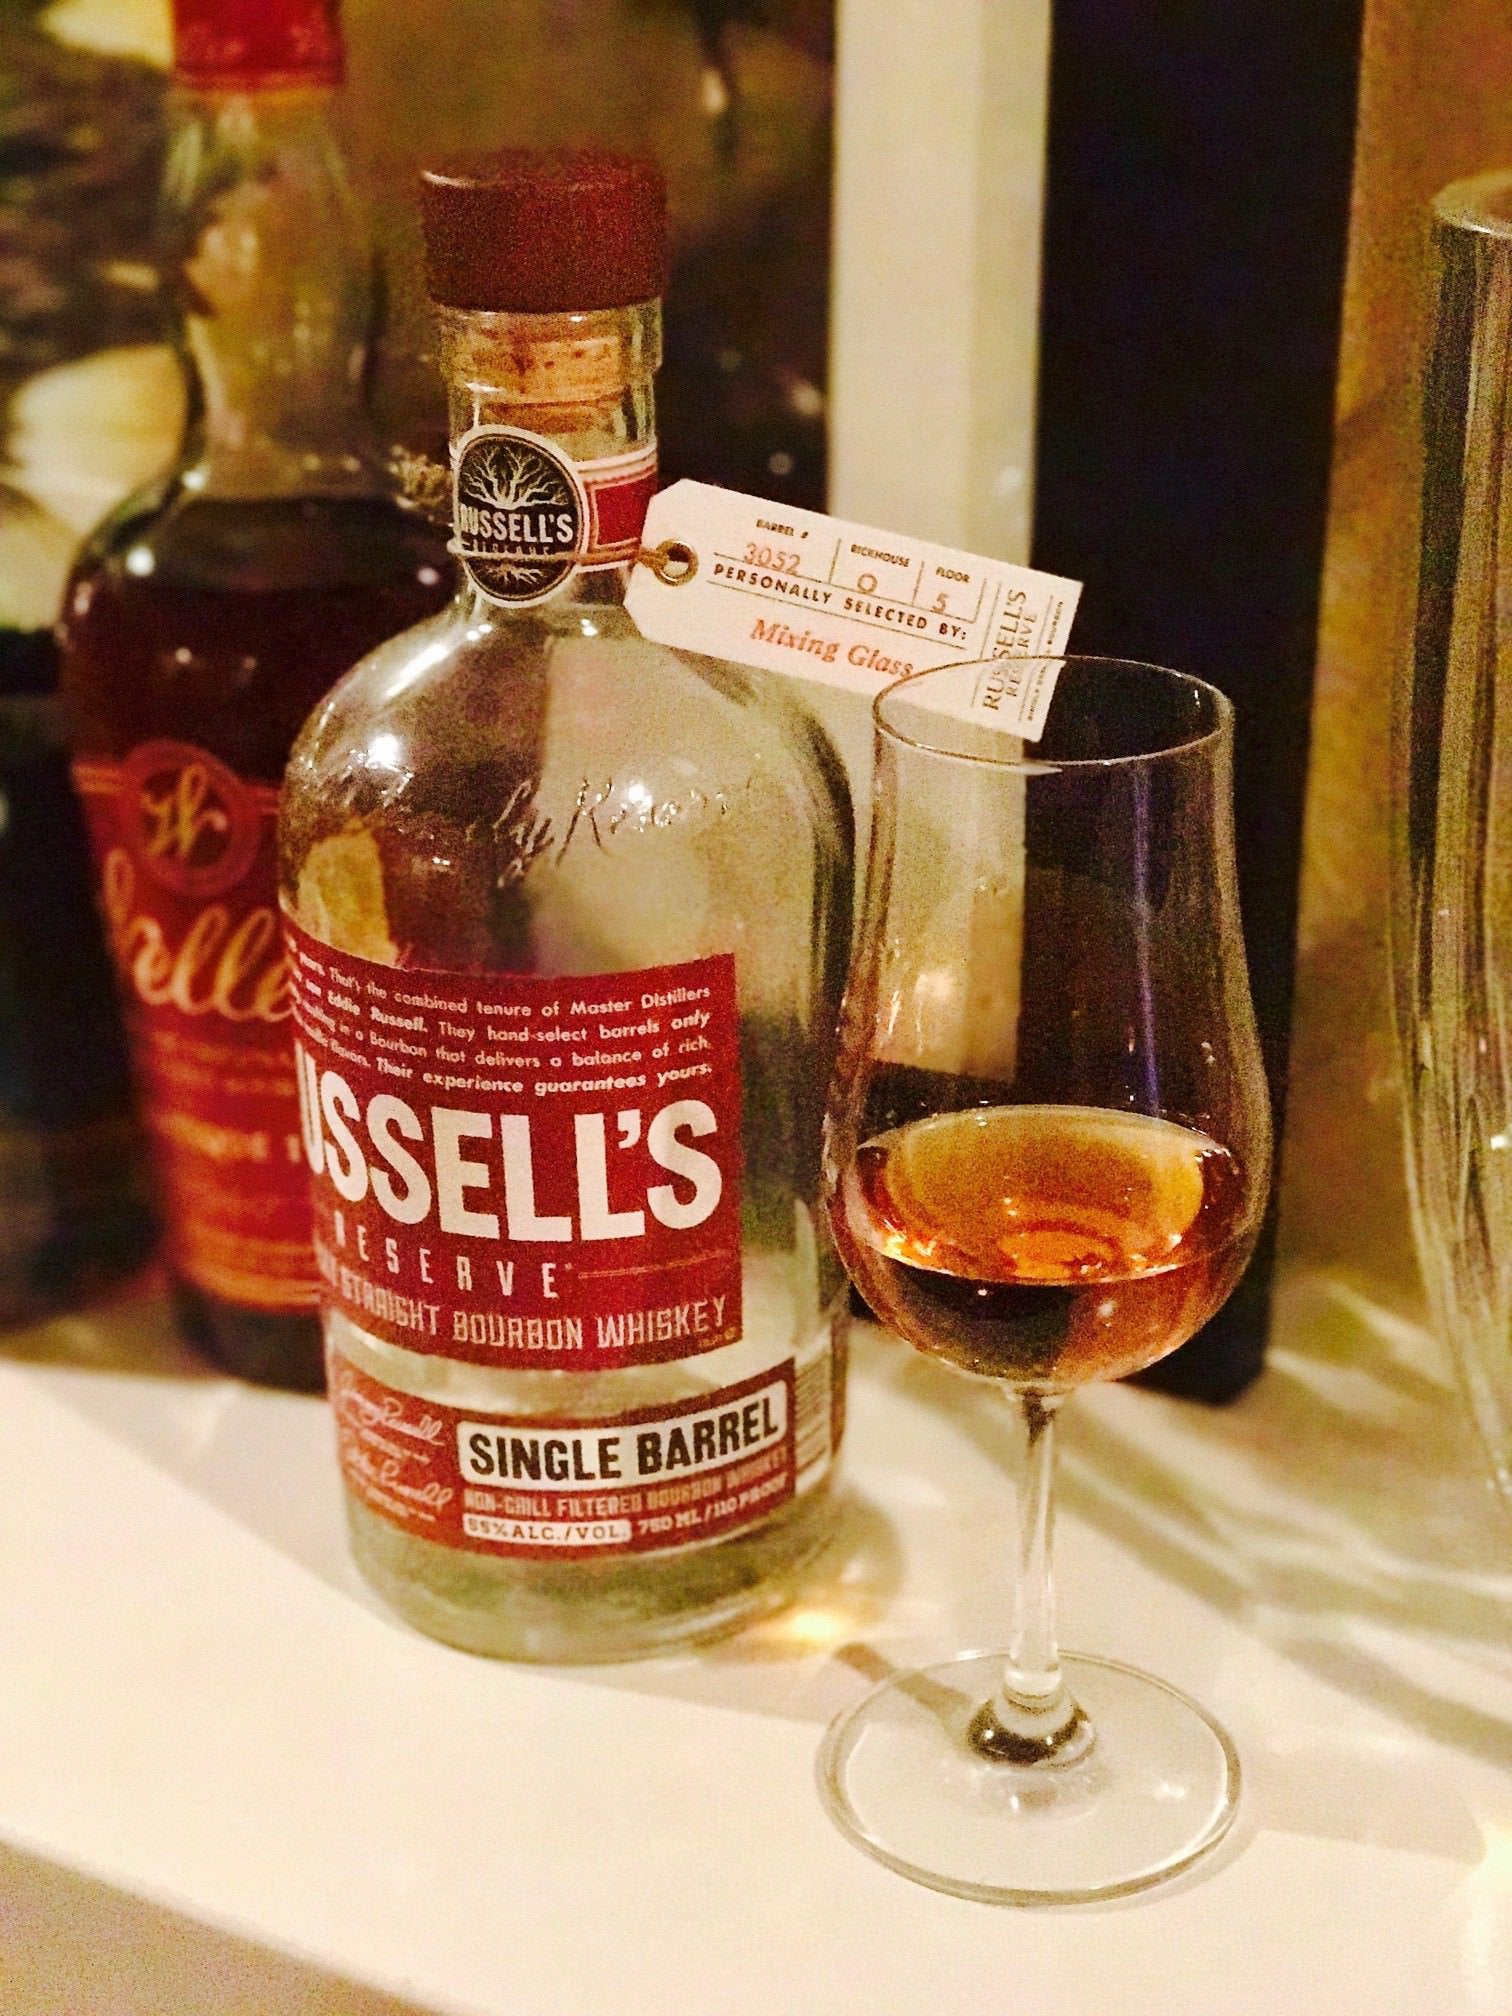 Review #1: Russell